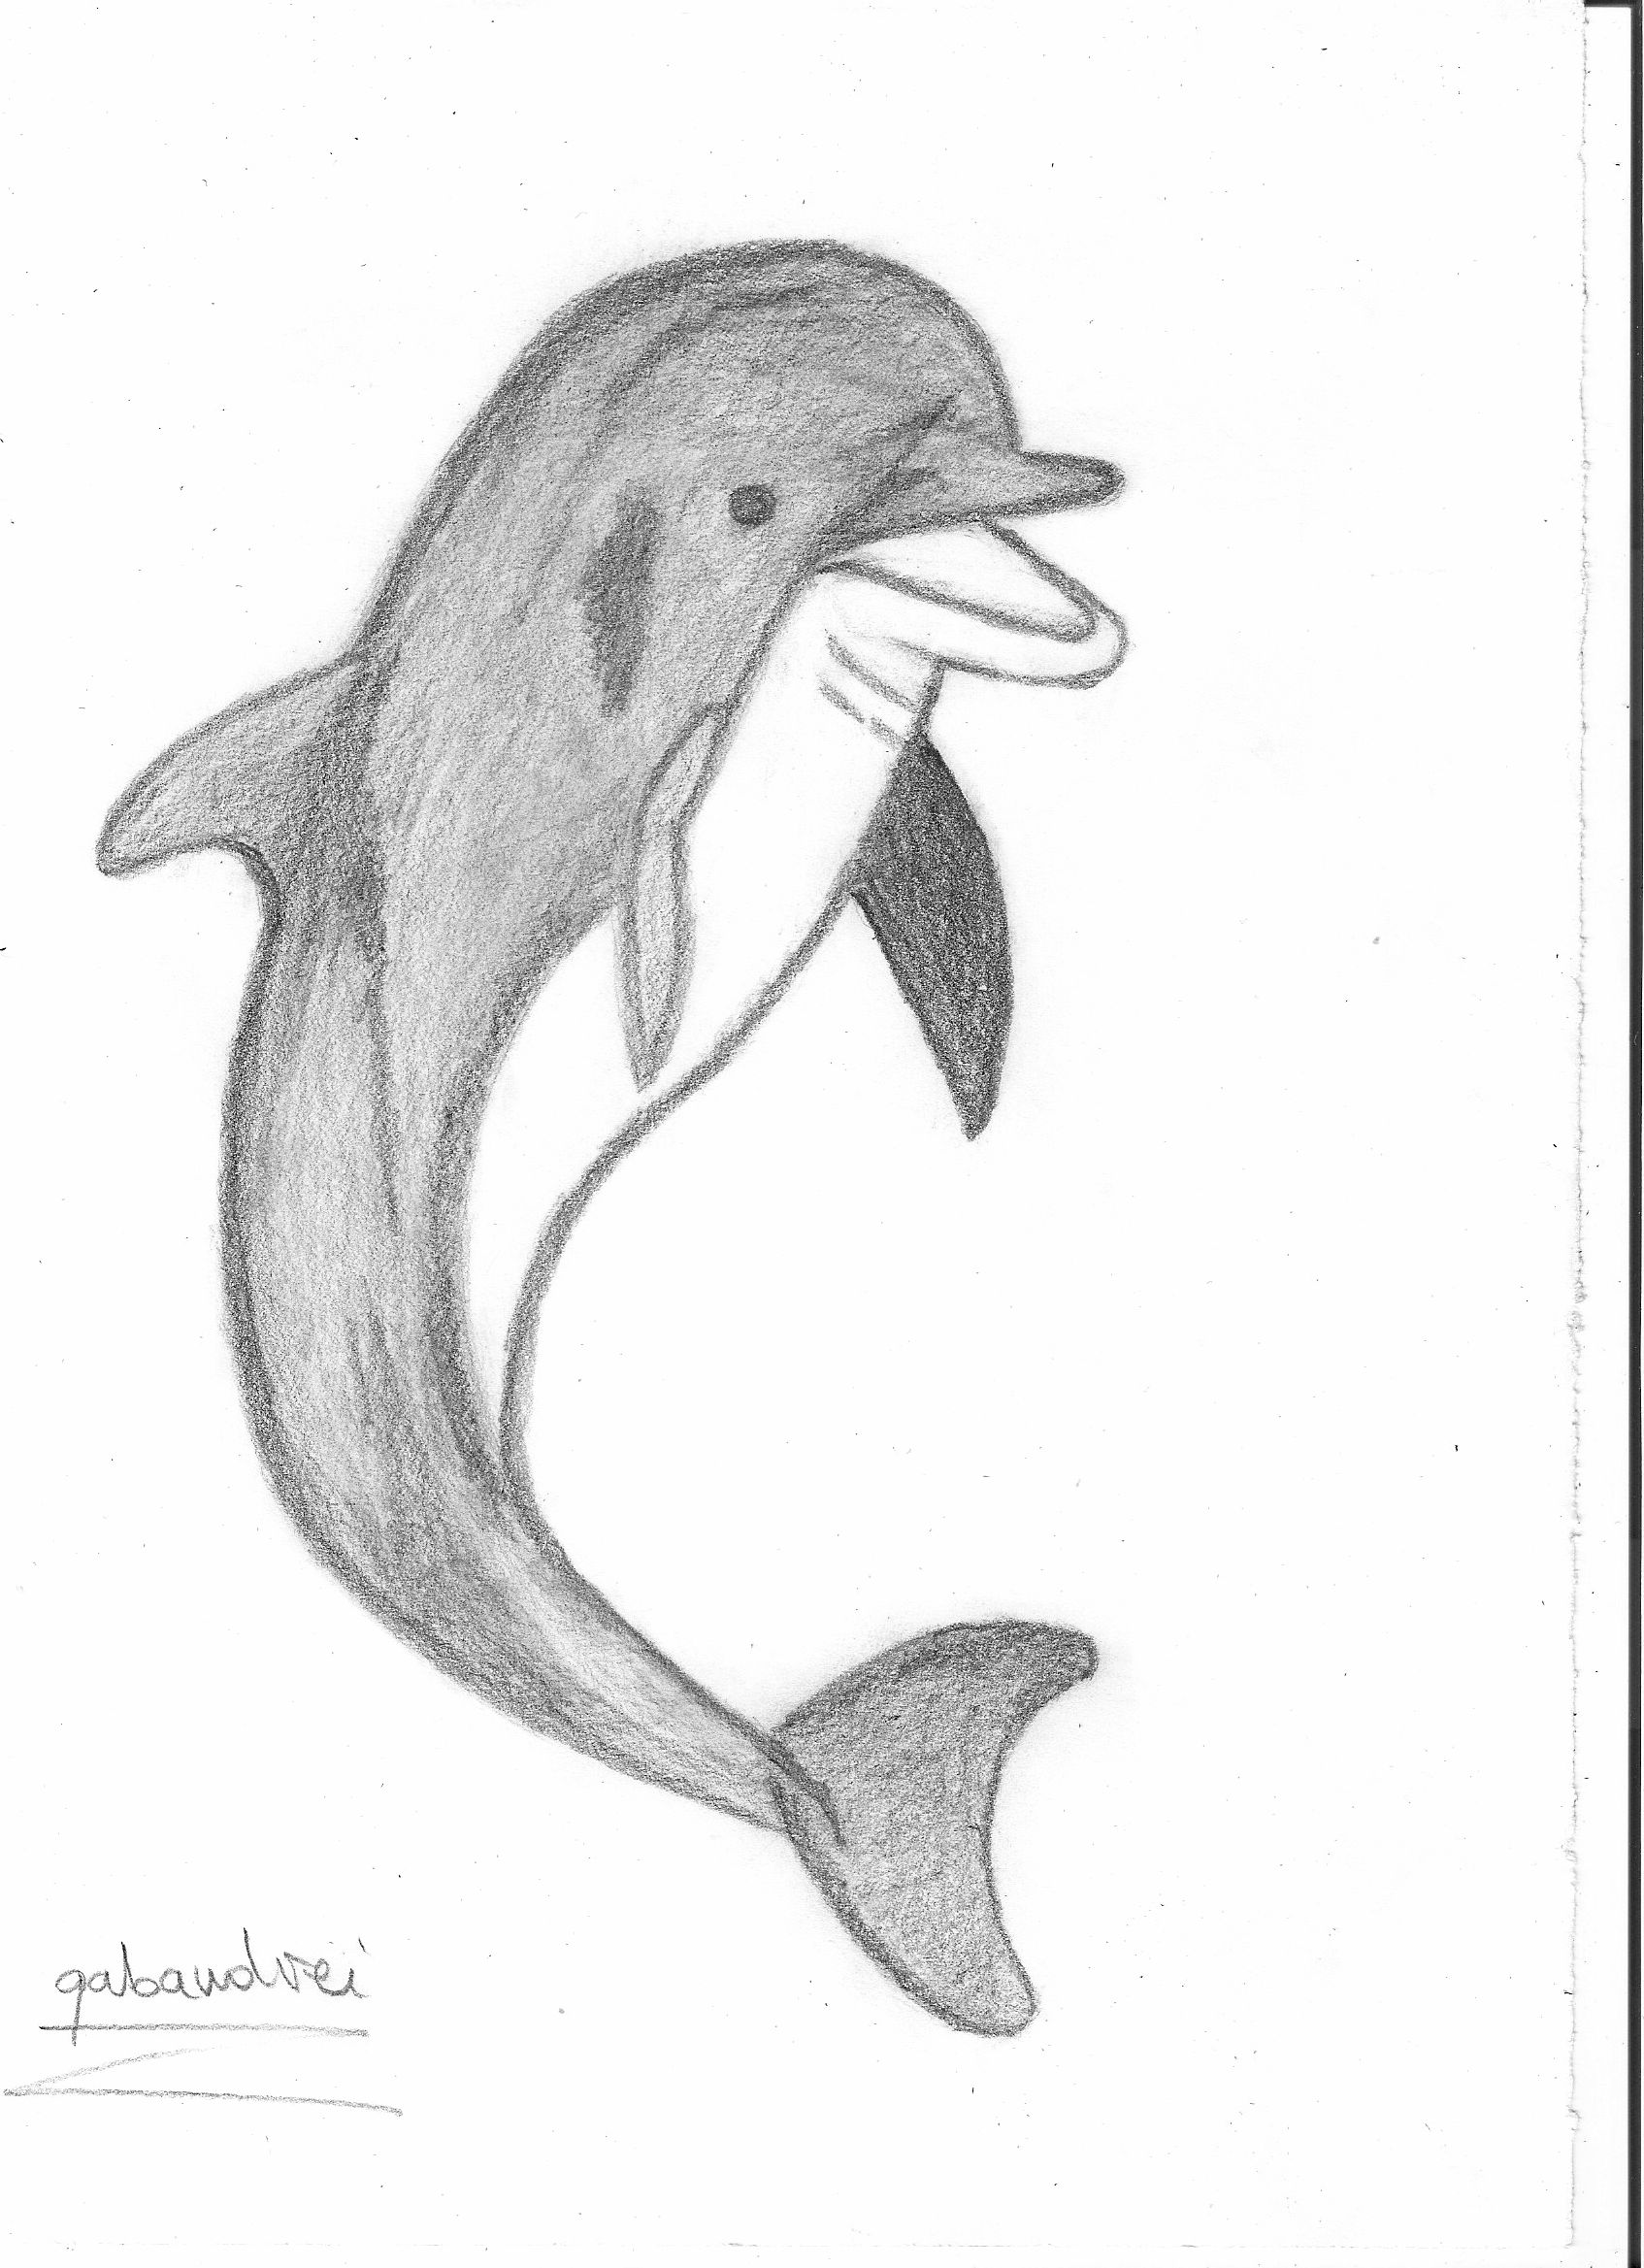 How to Draw a Dolphin: 2 Simple Ways